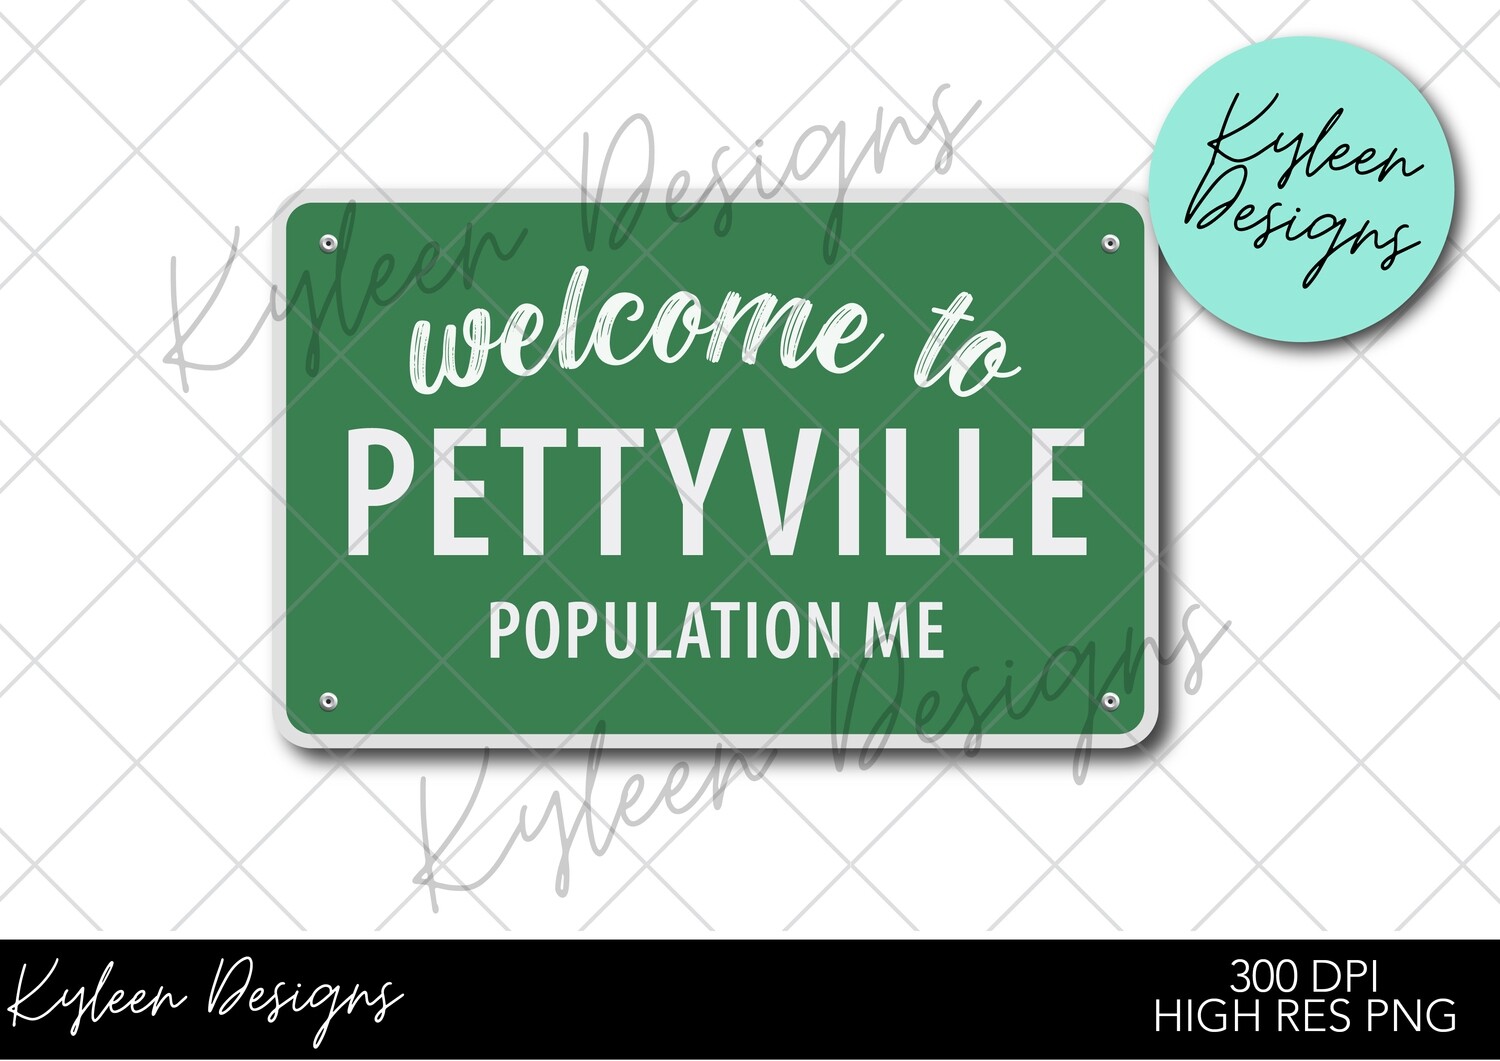 Welcome to Pettyville High Res PNG 300 DPI file